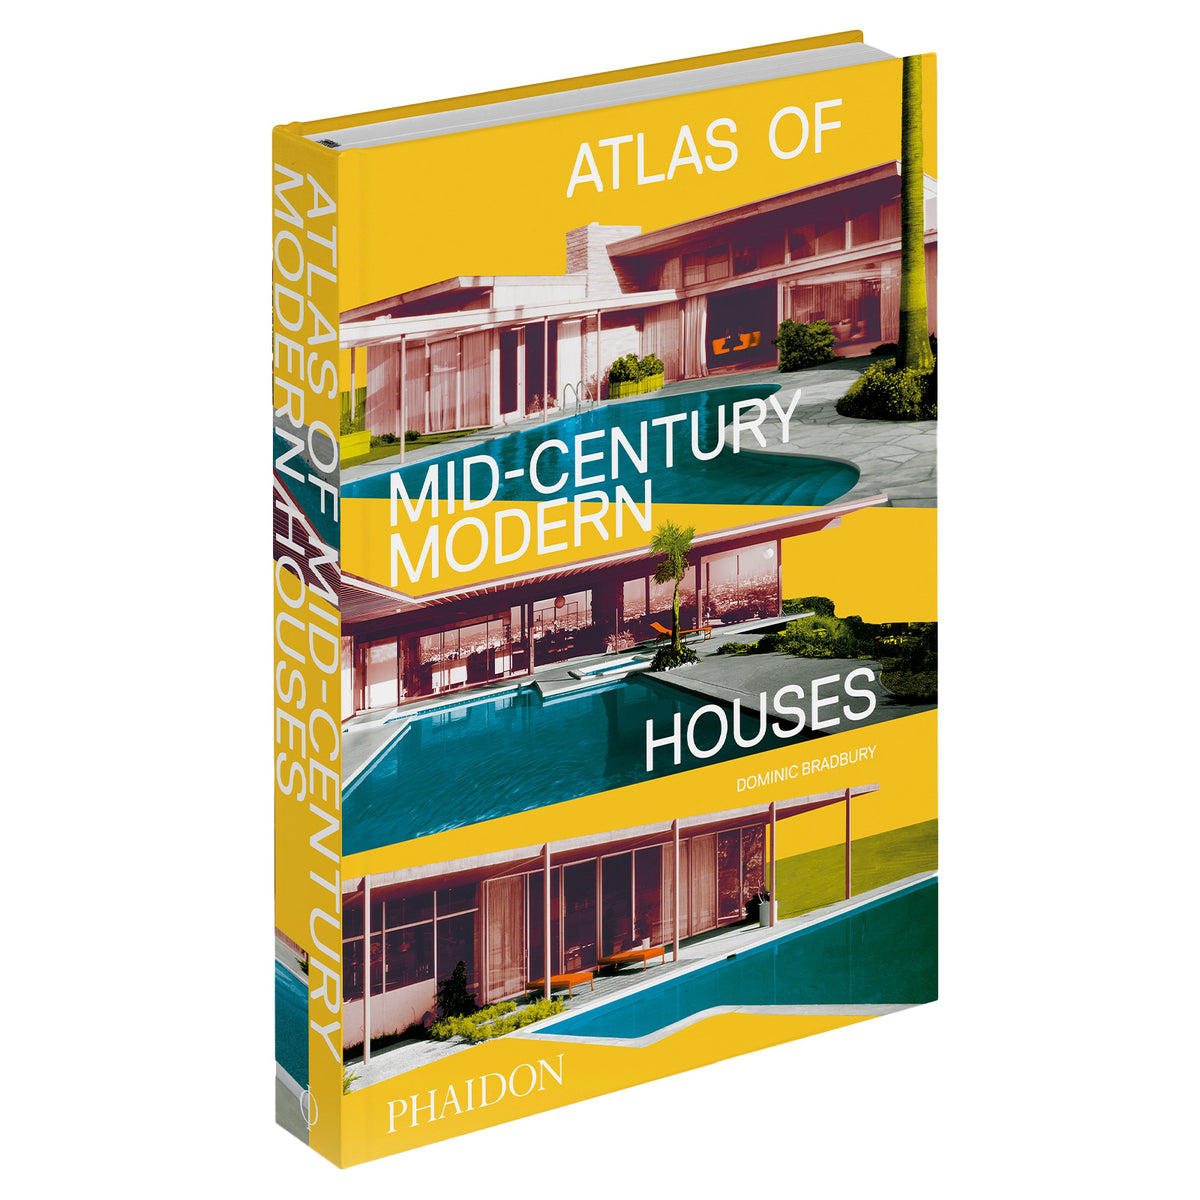 Atlas of Mid-Century Modern Houses&#39; book cover.